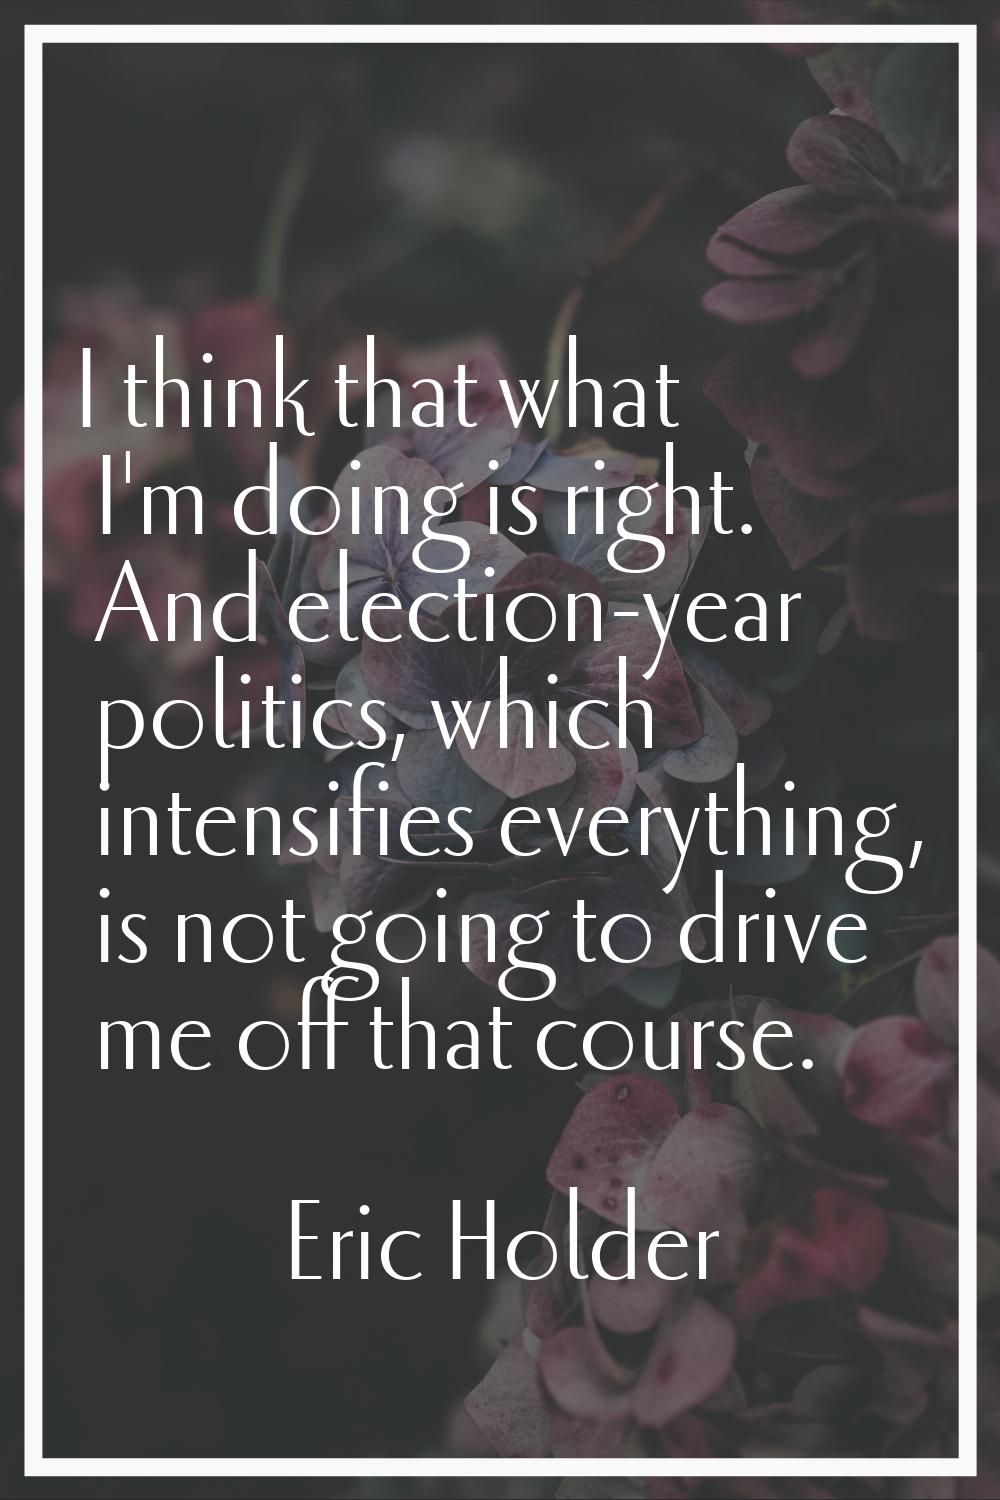 I think that what I'm doing is right. And election-year politics, which intensifies everything, is 